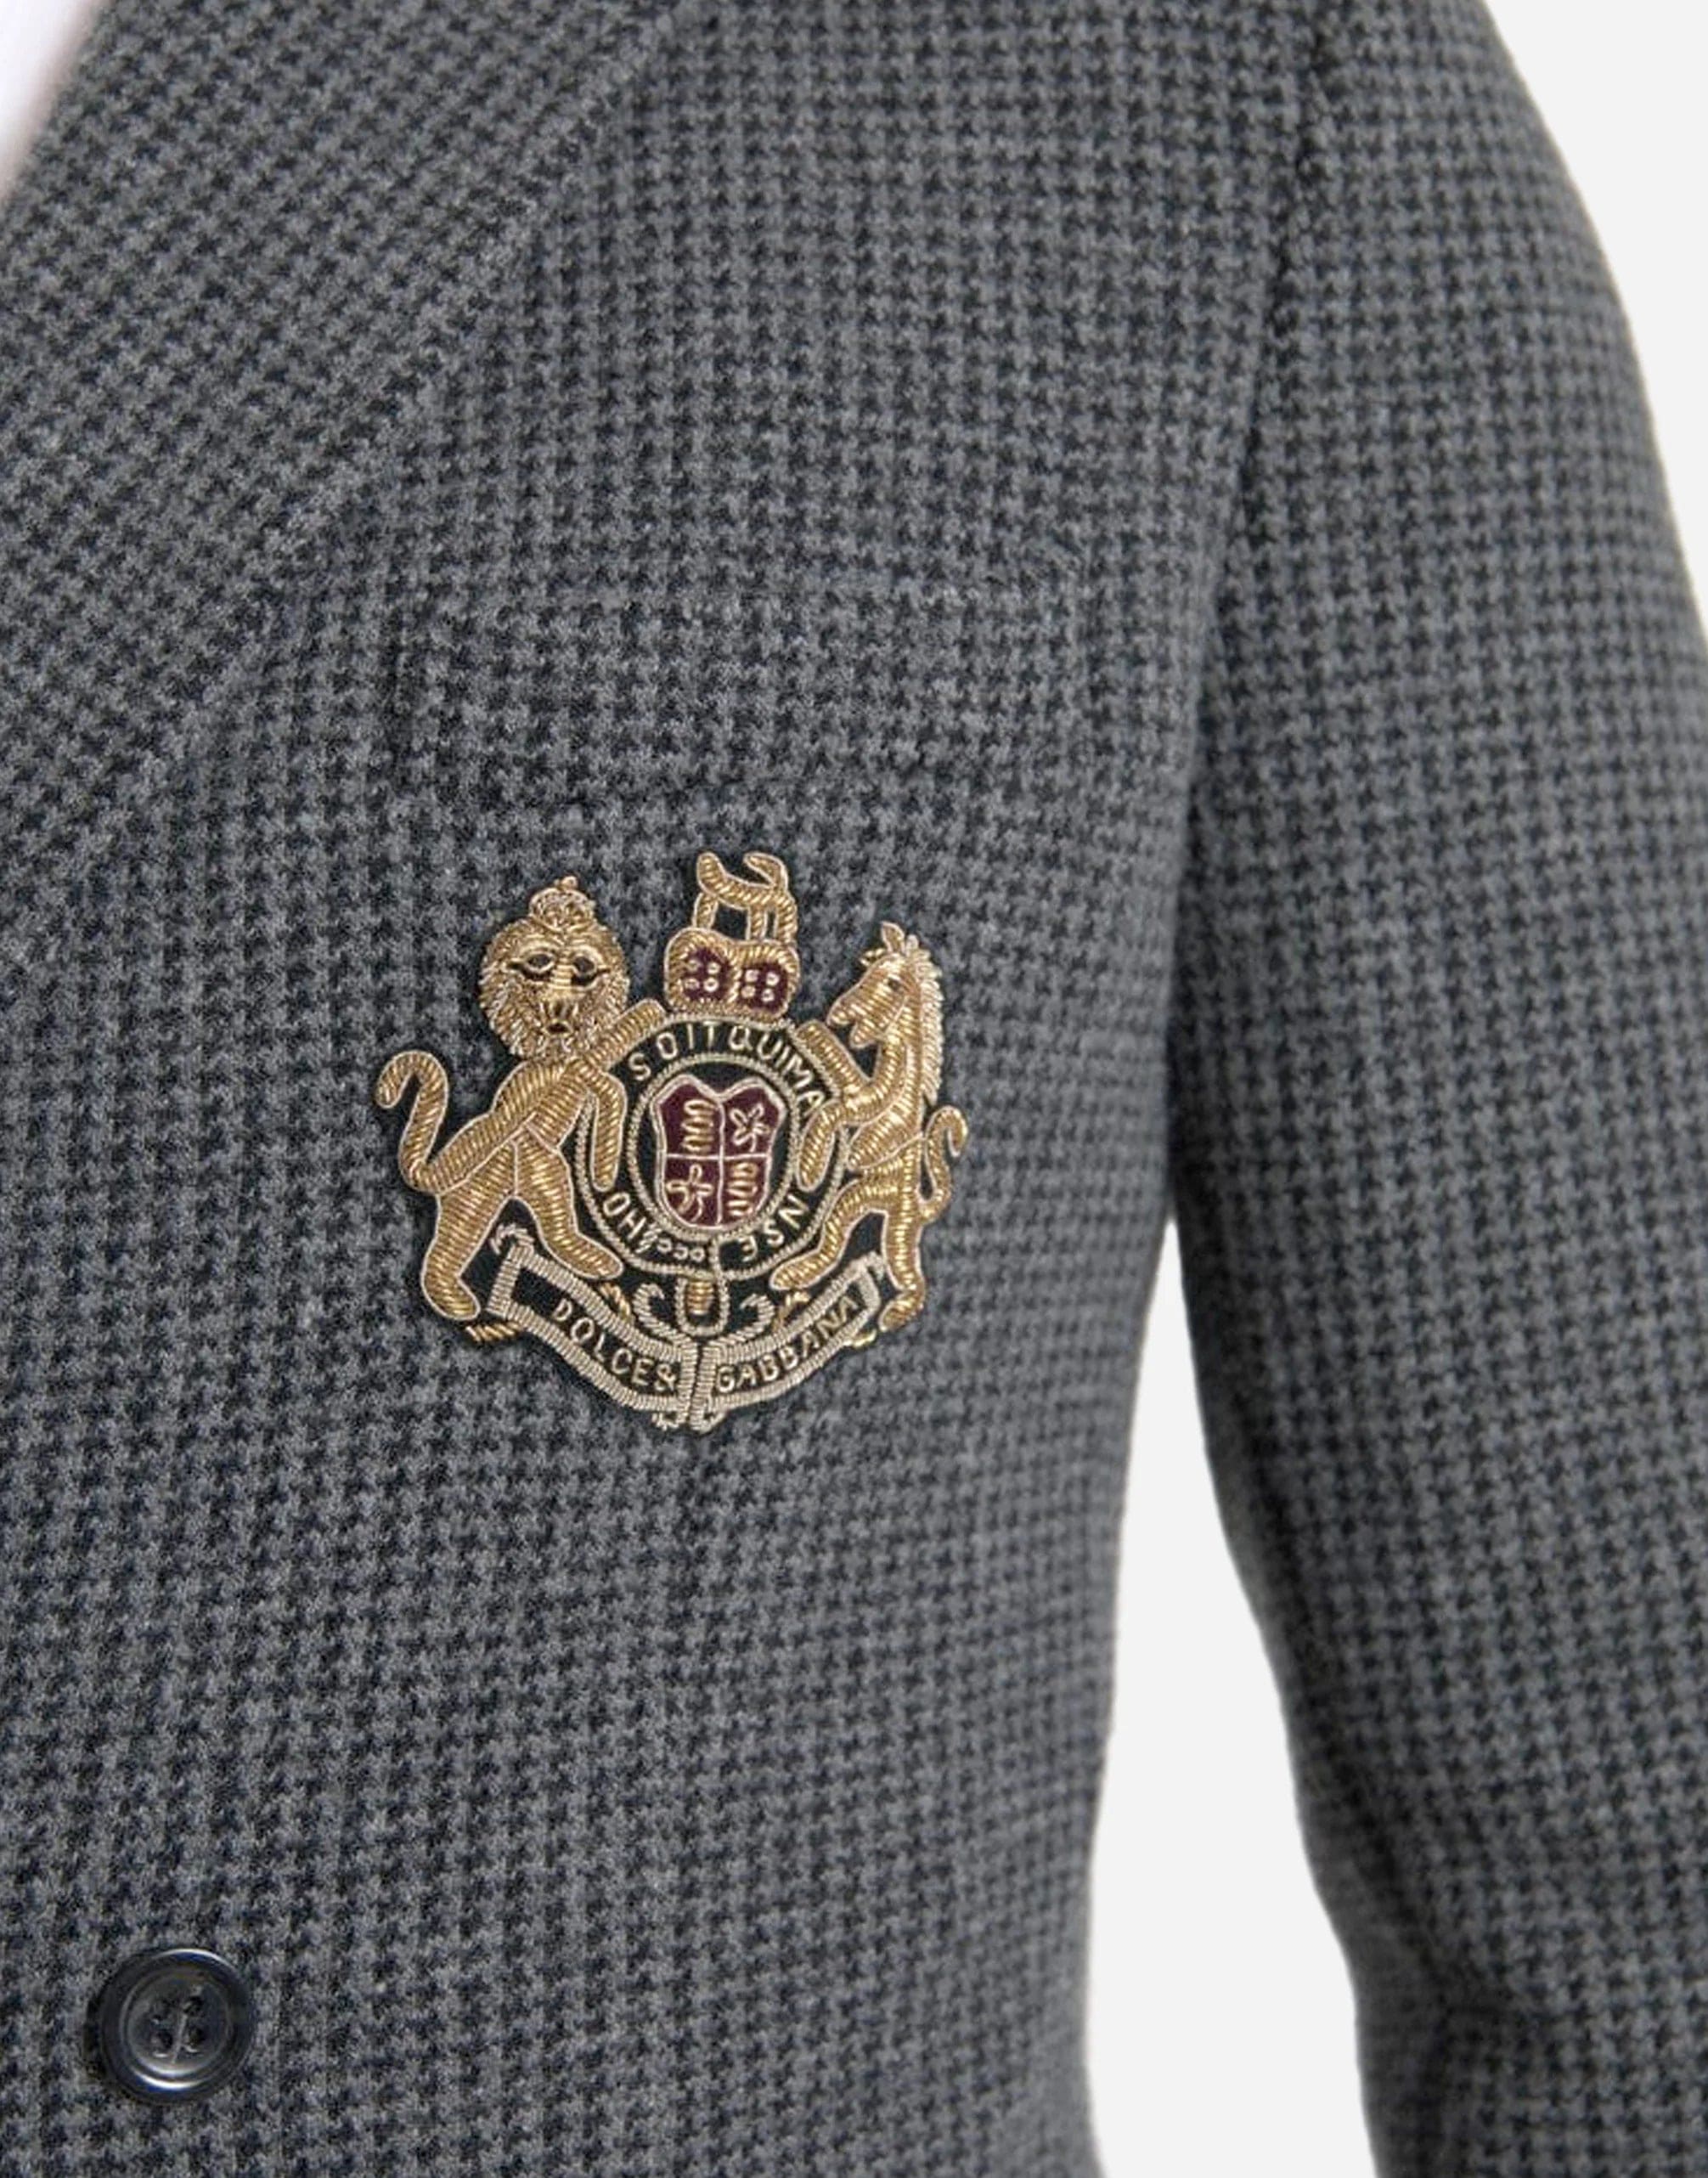 Dolce & Gabbana Soit Qui Mal Logo Embroidery Double Breasted Blazer